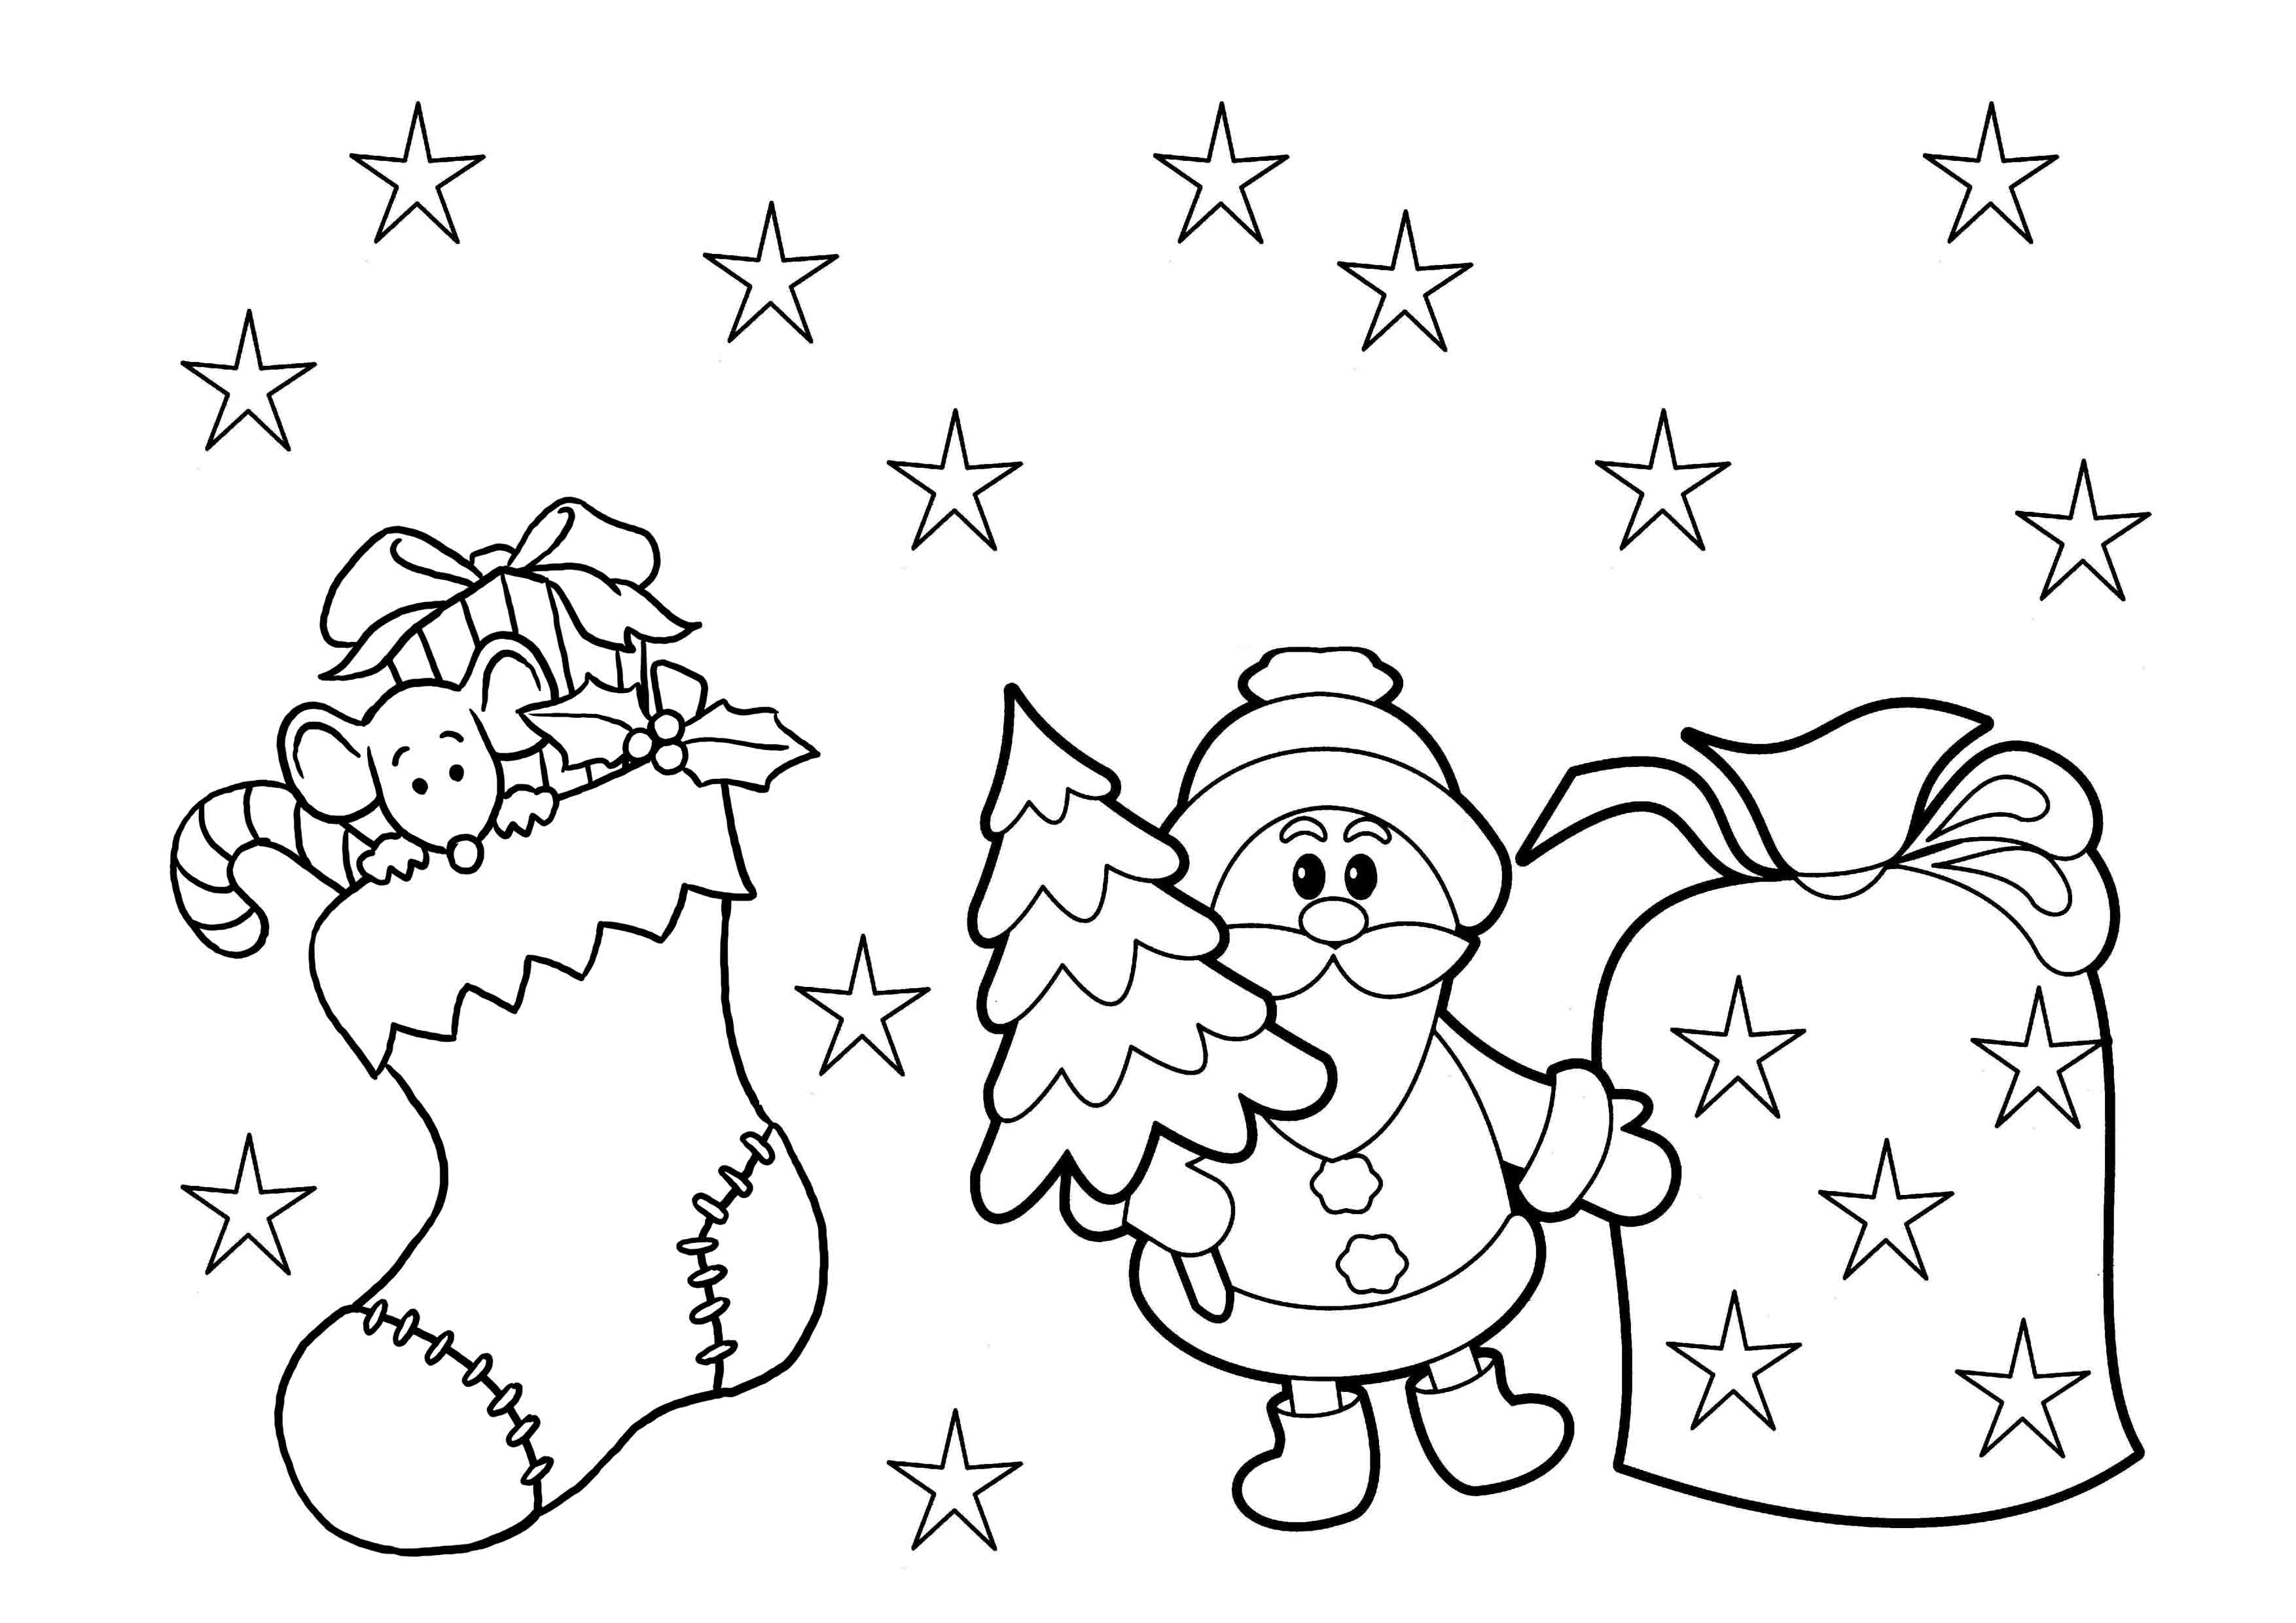 Coloring Pages : Christmas Coloring Sheets For Preschool Pages Print - Free Printable Christmas Coloring Pages For Kids